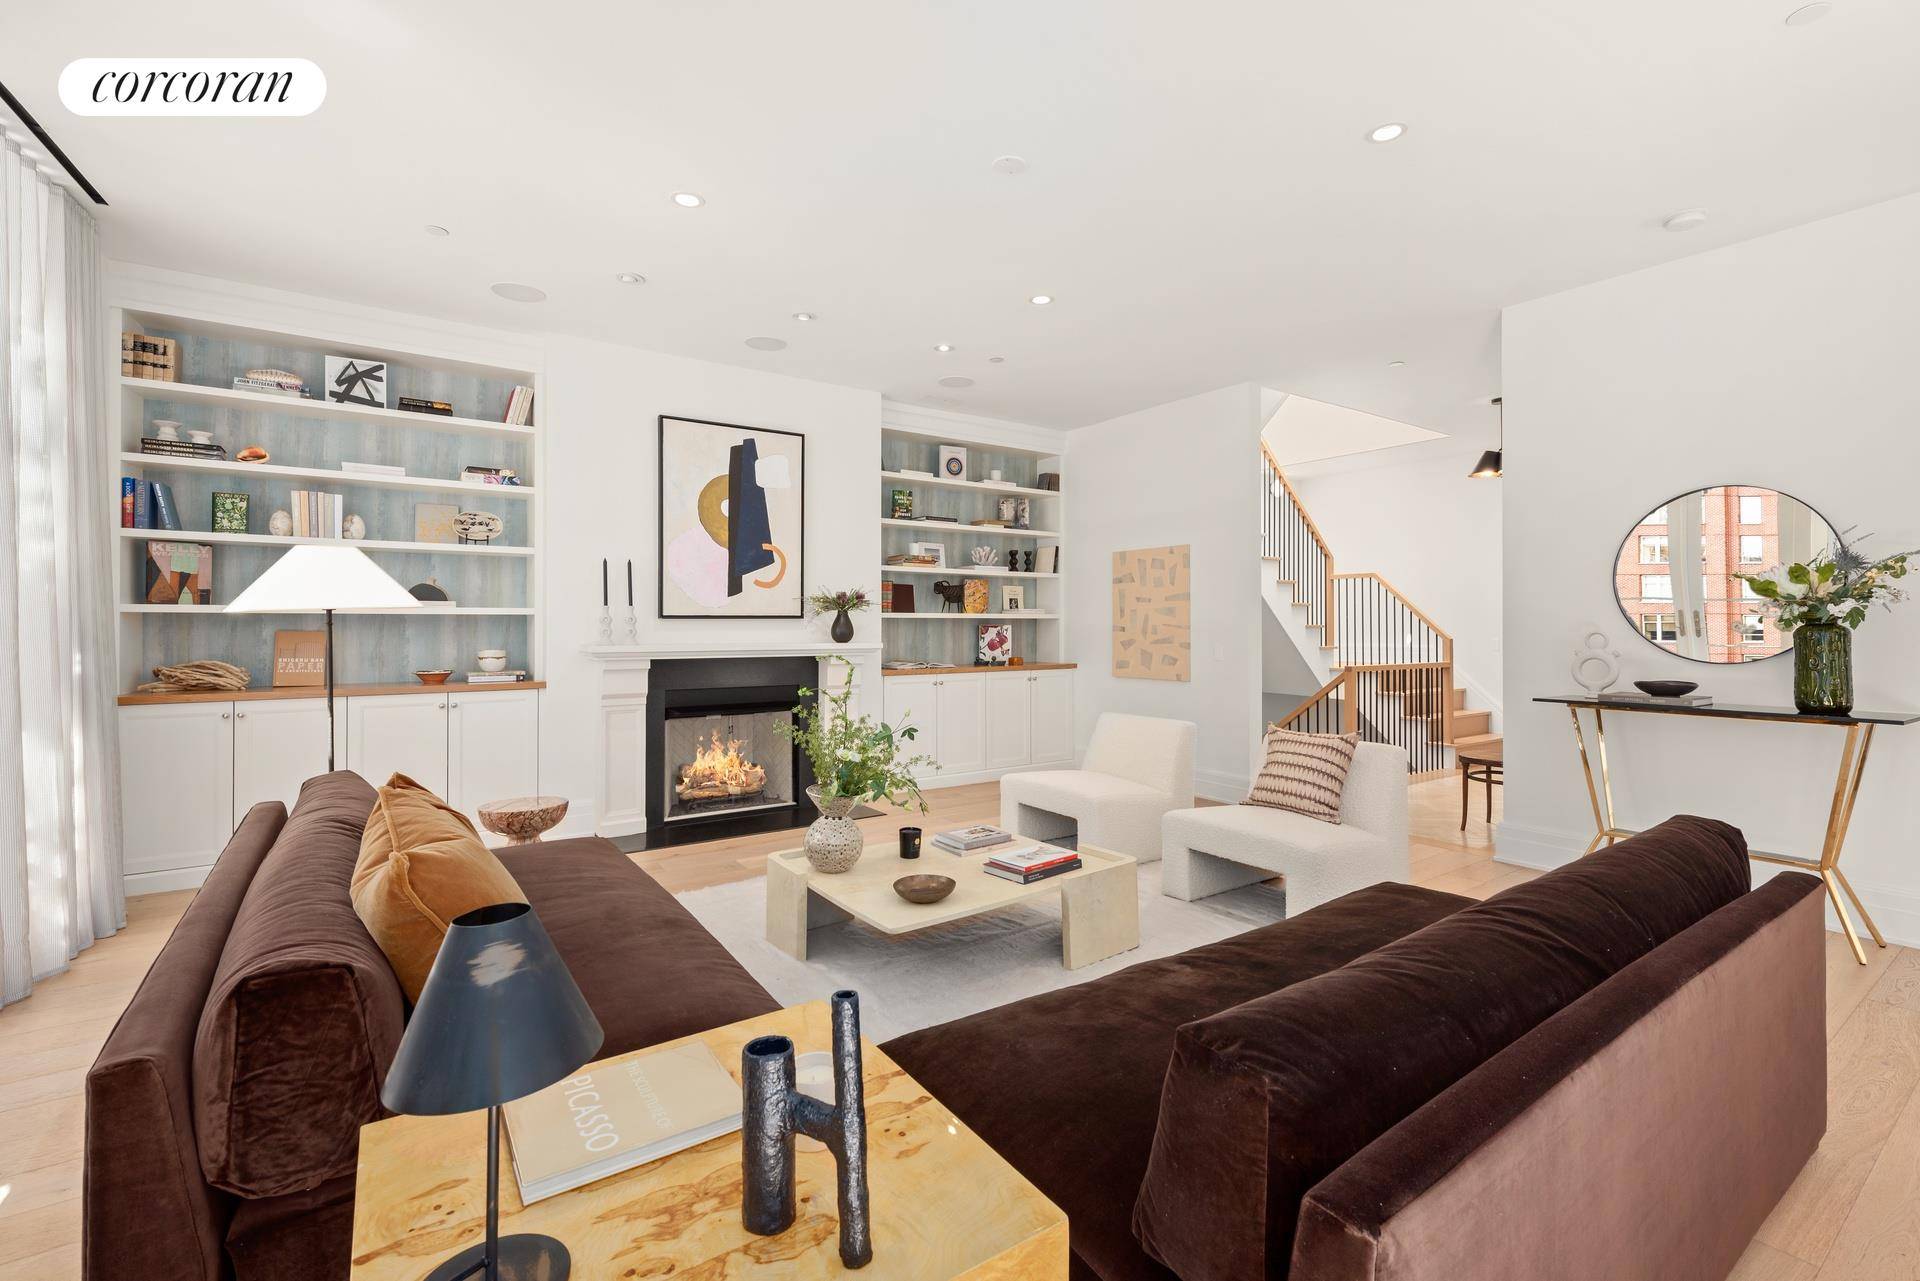 Exquisite Tribeca penthouse living awaits in this expansive four bedroom plus office, four and a half bathroom designer triplex with two massive terraces offering nearly 1, 700 square feet of ...